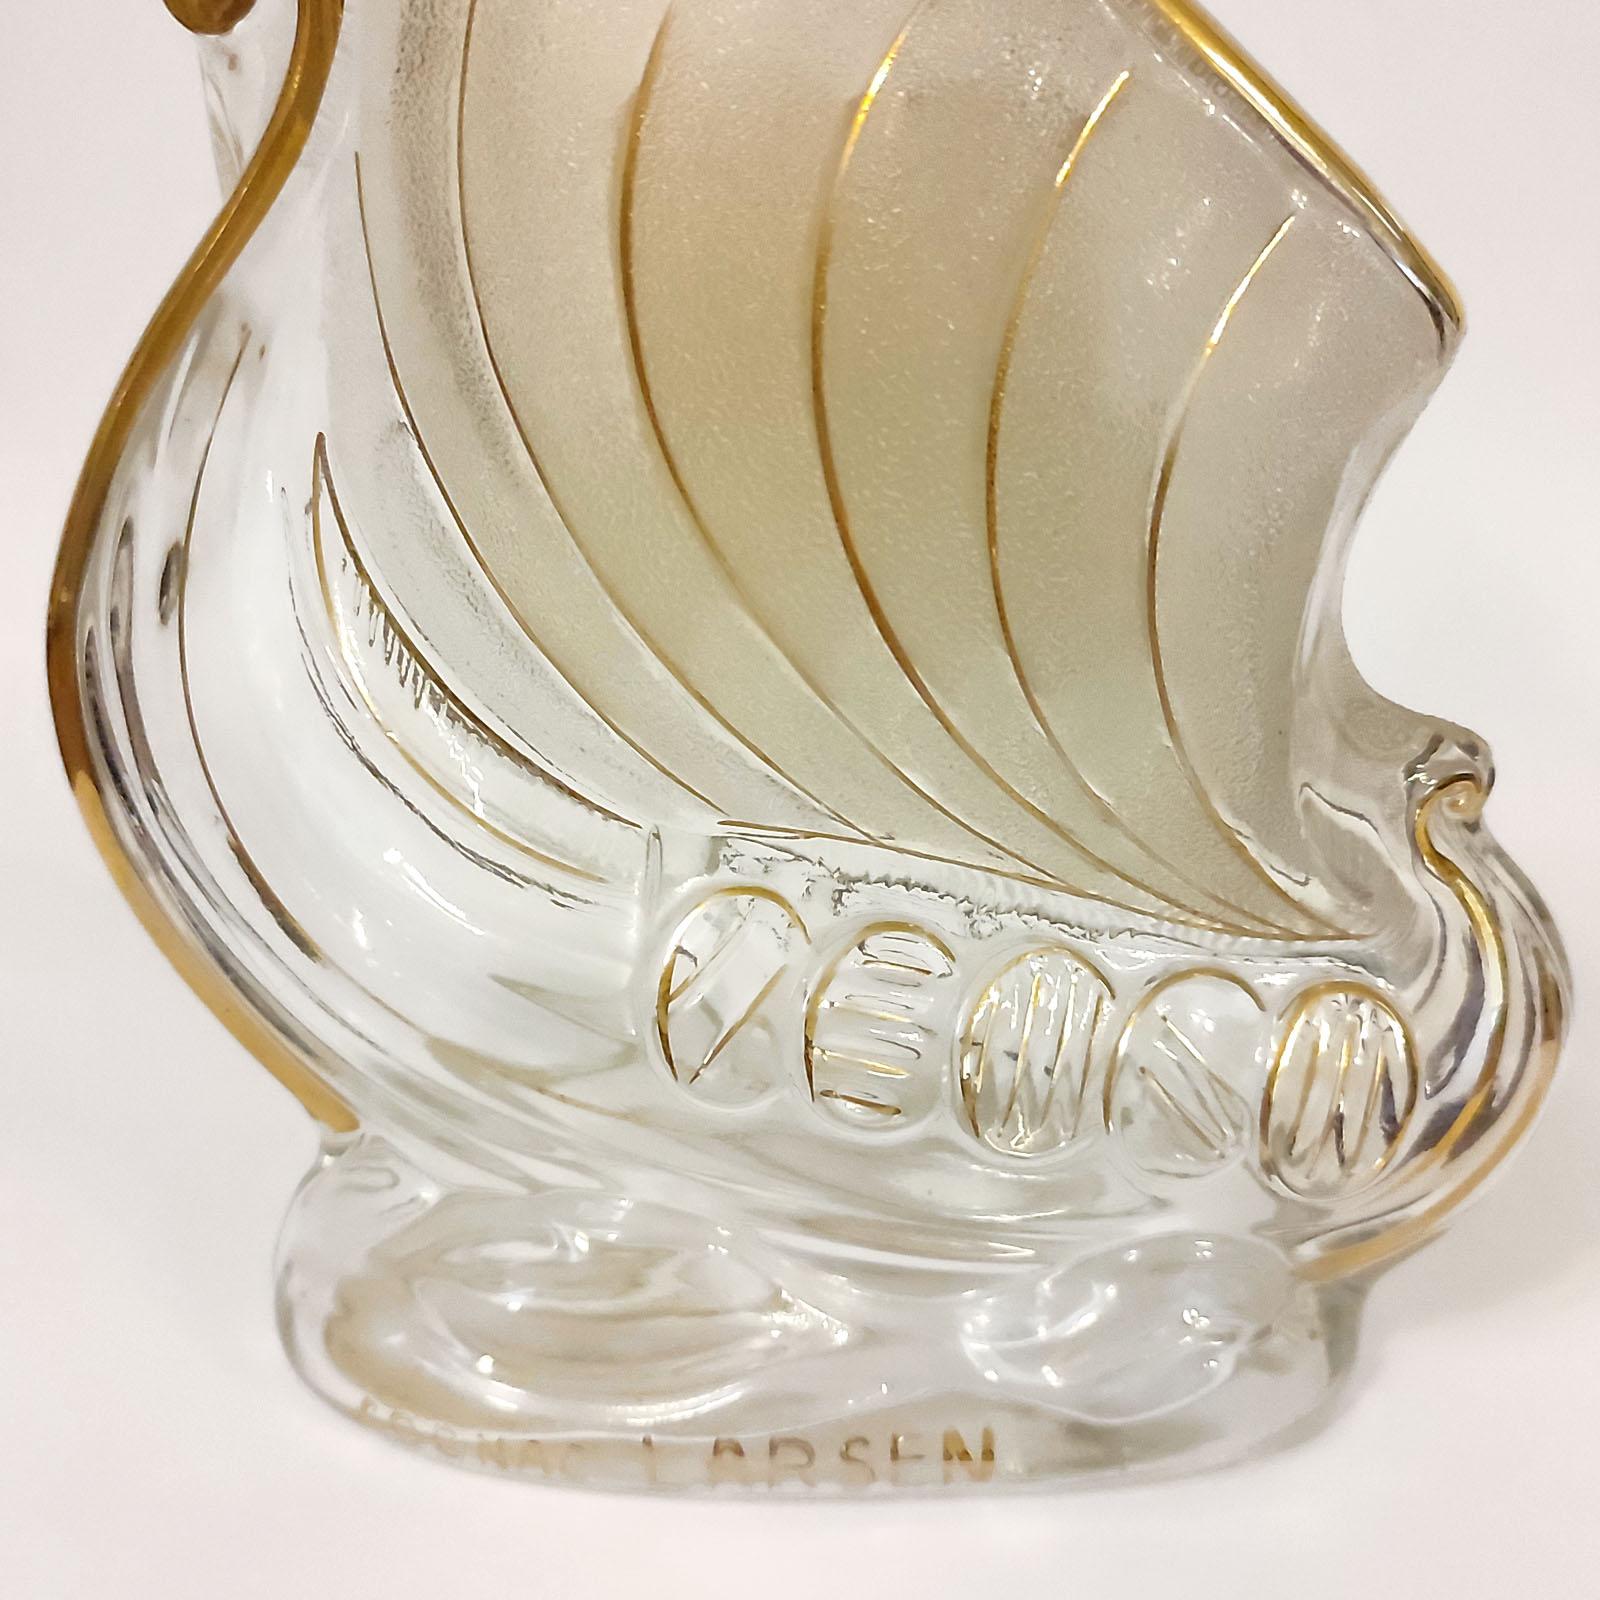 Mid-Century Modern Vintage Cognac Decanter with Stopper, Viking Ship Shape, France 1960s For Sale